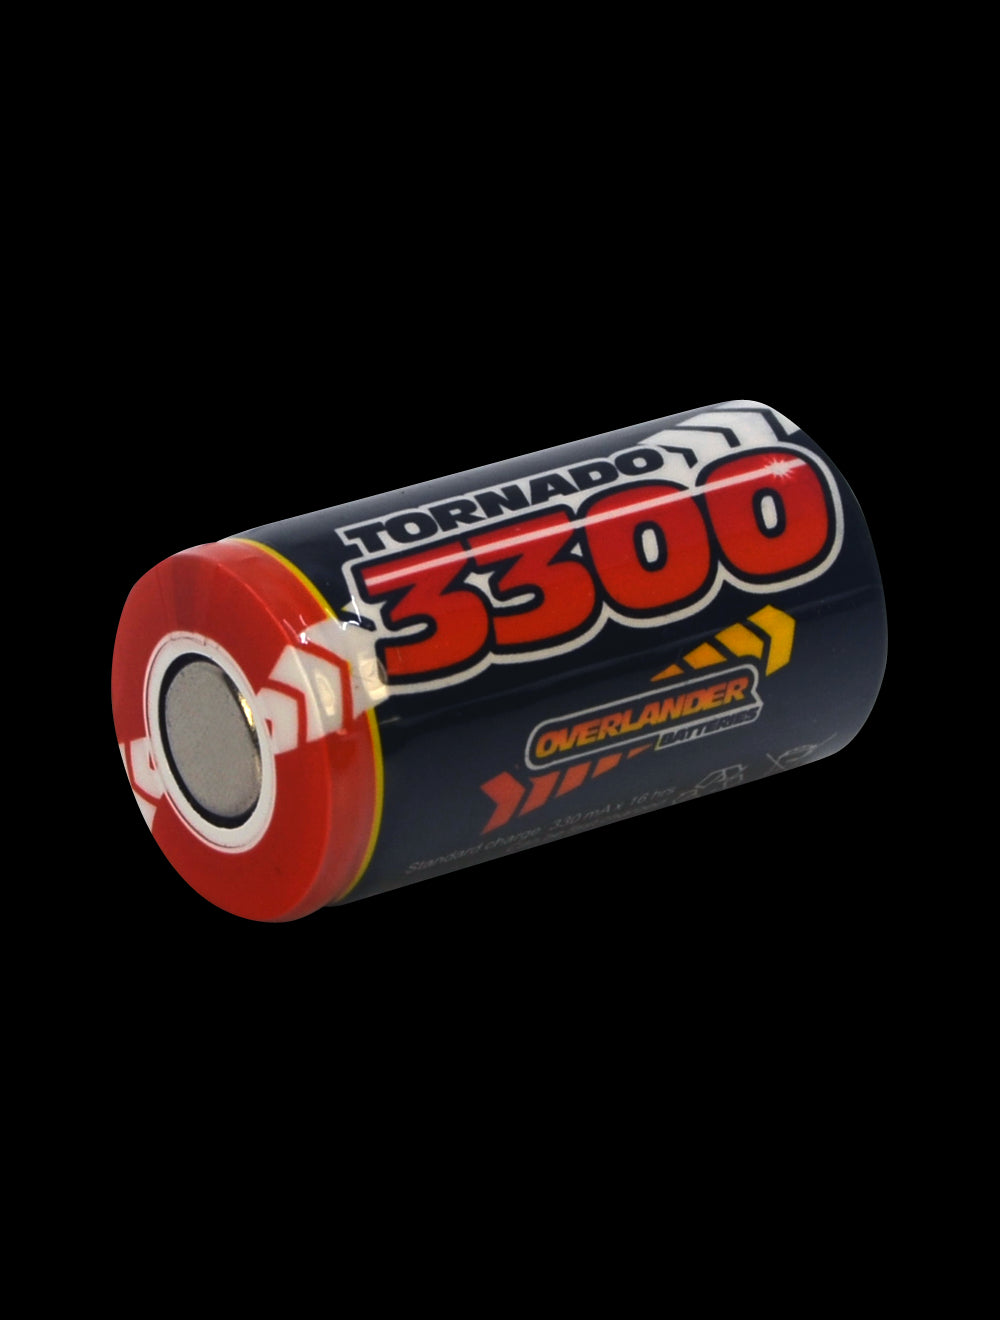 Overlander SubC 3300mAh 1.2V NiMH Cell - Tagged 2591